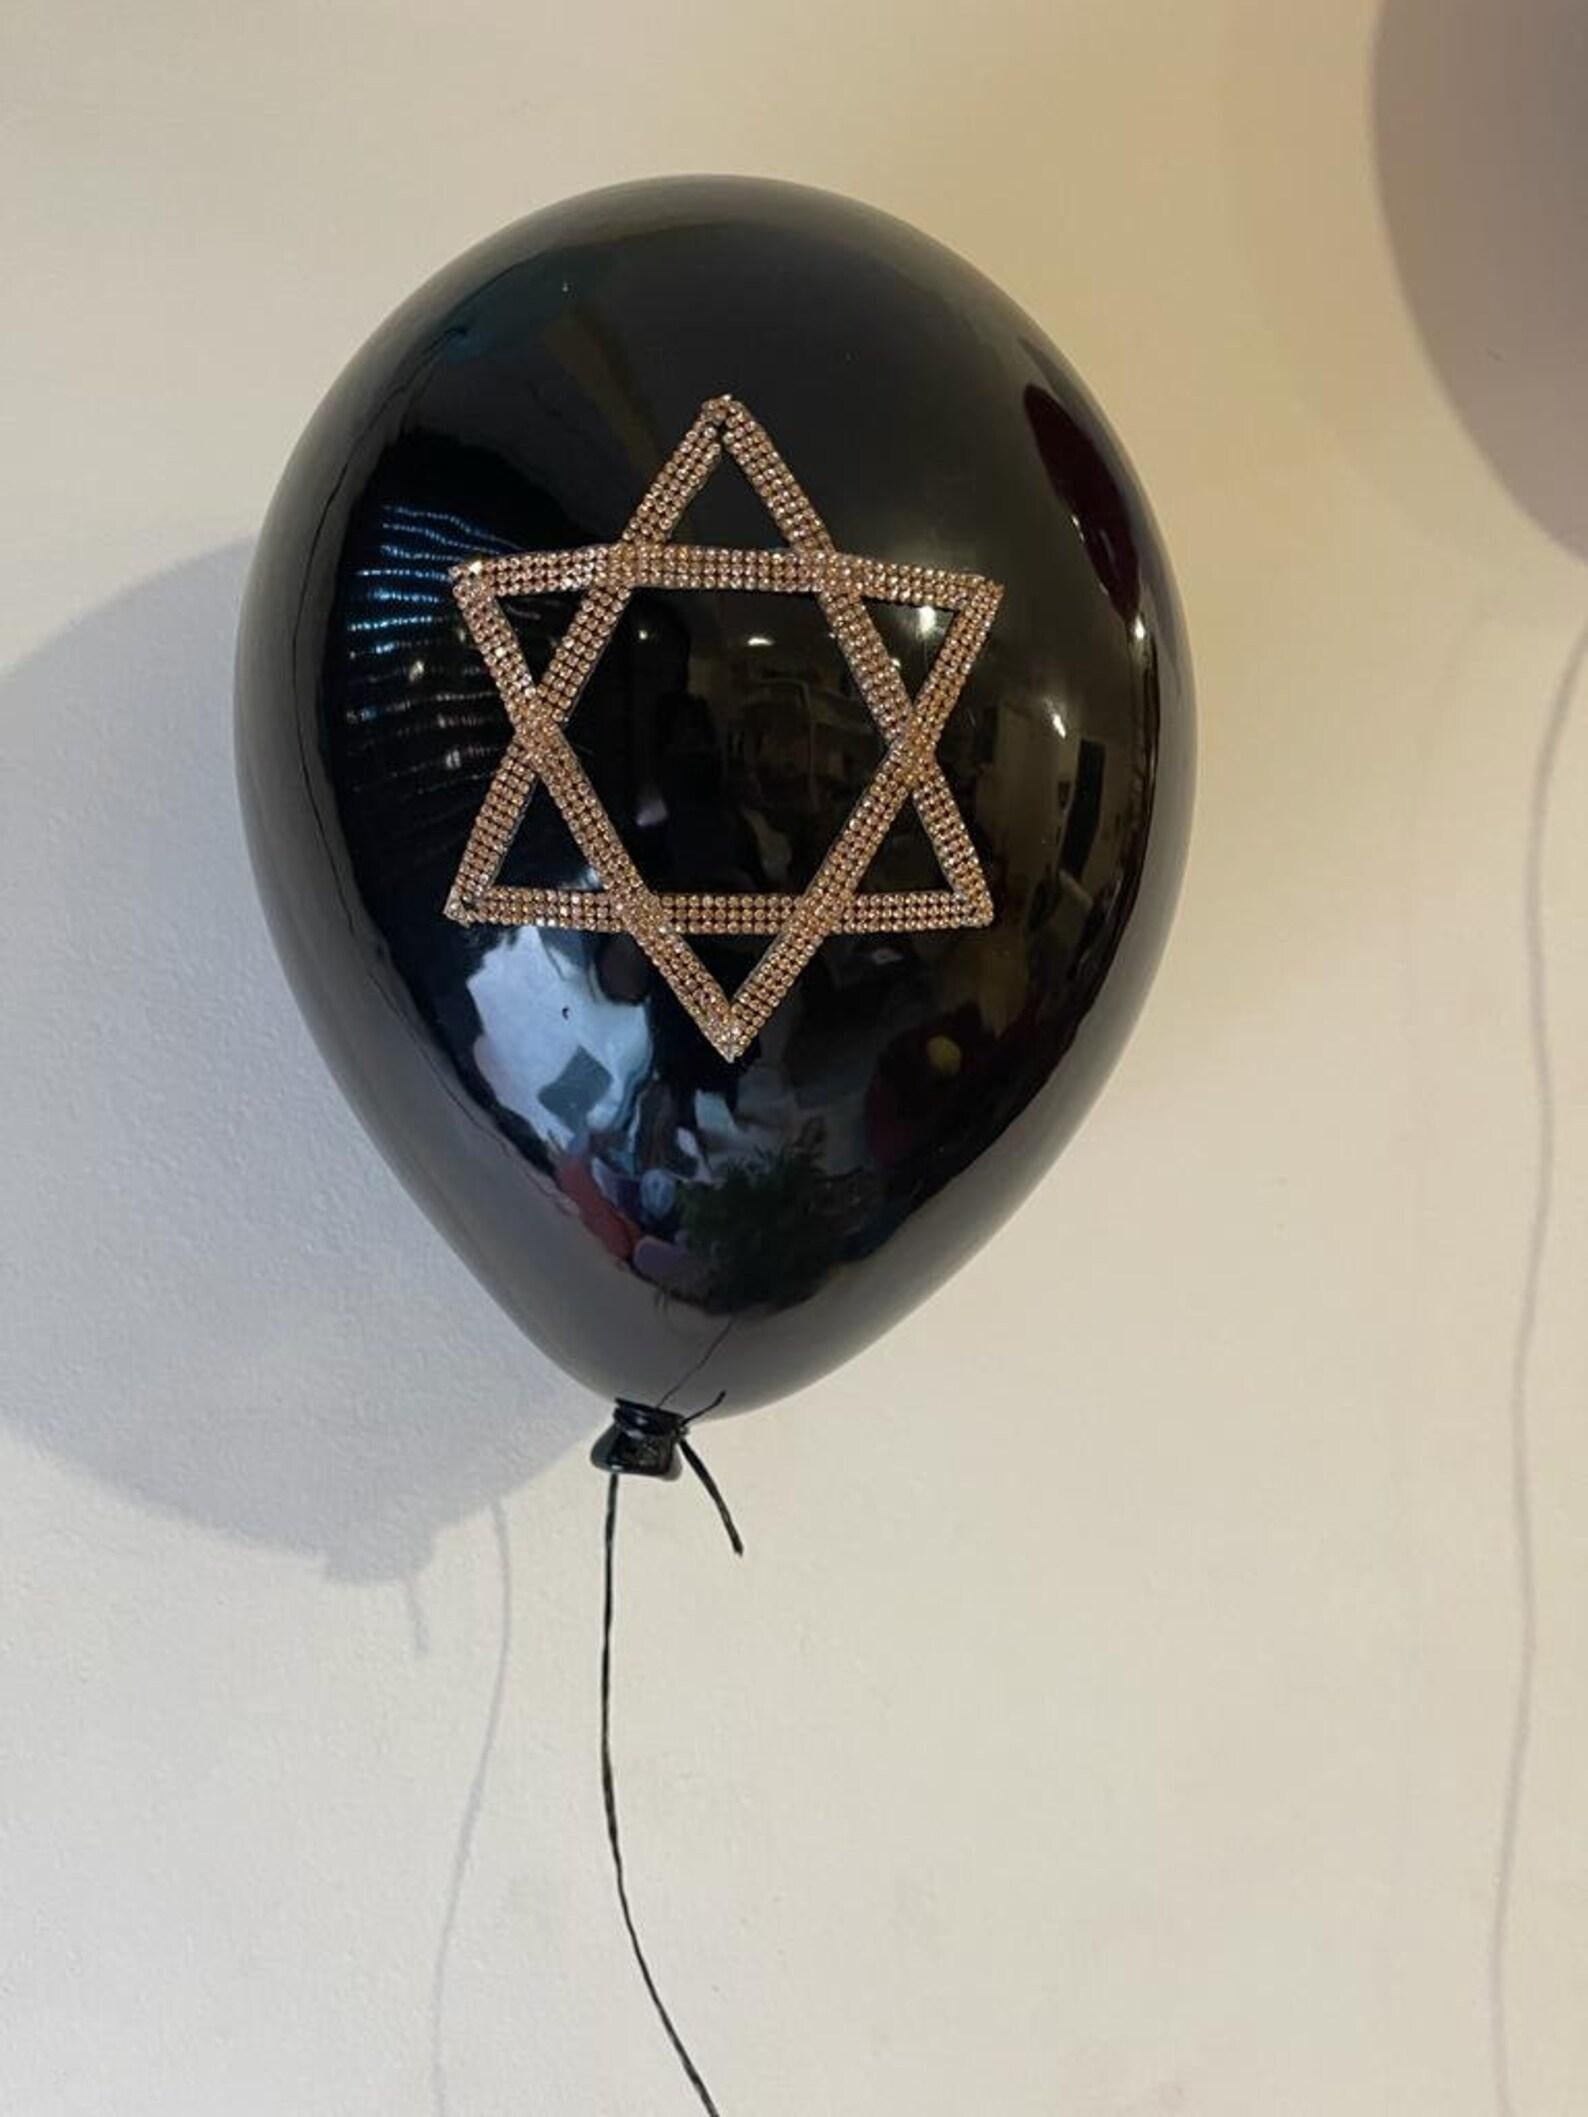 This swarovski magen david ceramic balloon sculpture is a balloon for life and an art collectors piece. Its Vivid glossy color enhances sophisticated and cheerful space environment.
handmade in the picturesque village Arsuf in Israel the balloon